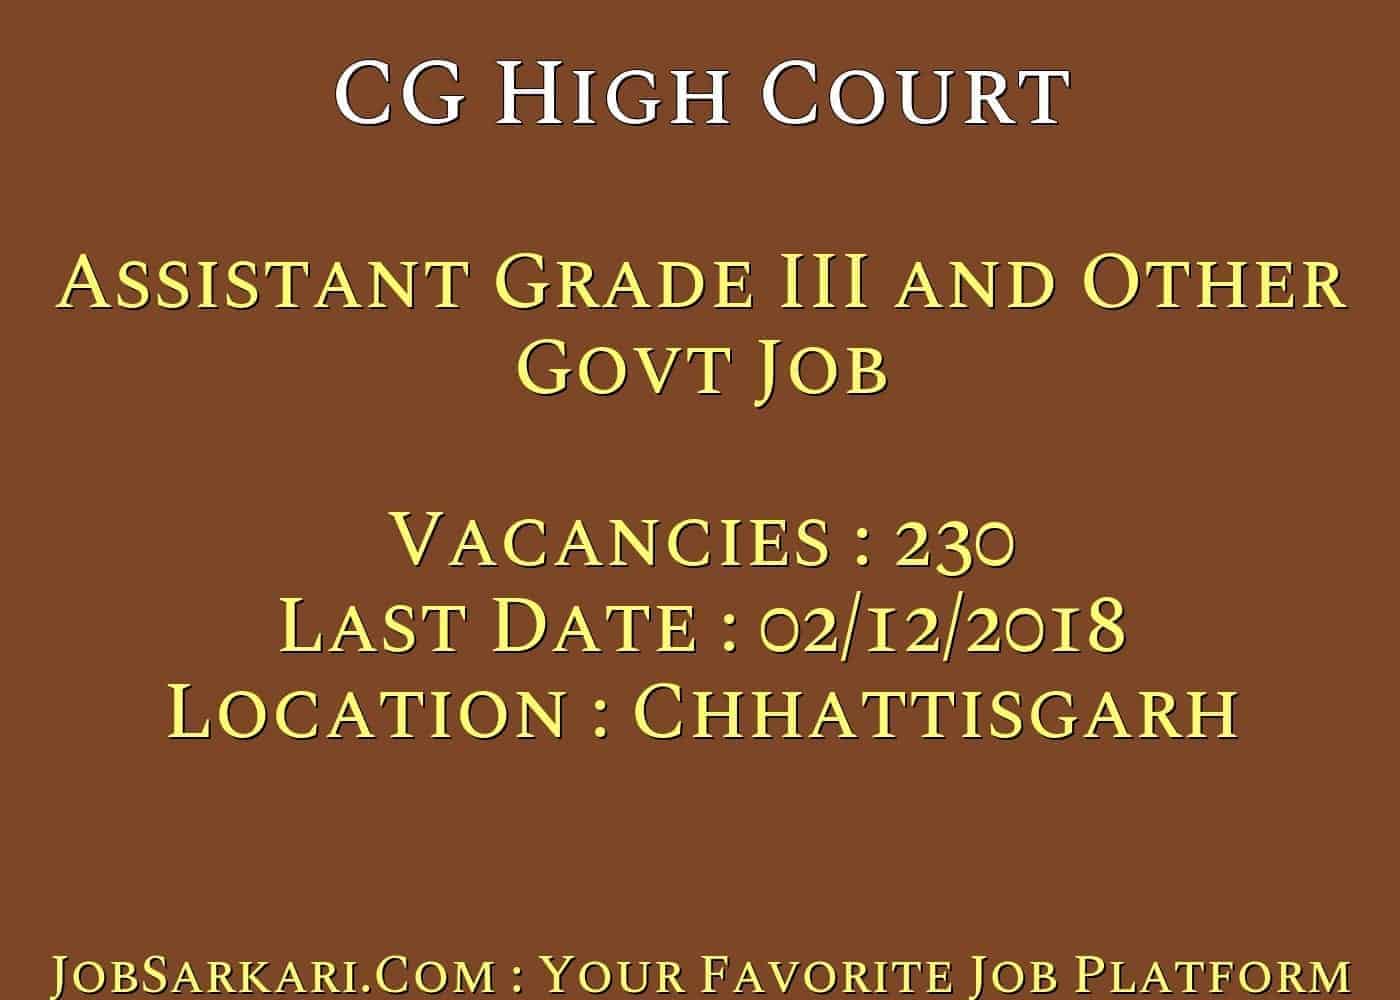 CG High Court Recruitment 2018 for Assistant Grade III and Other Govt Job